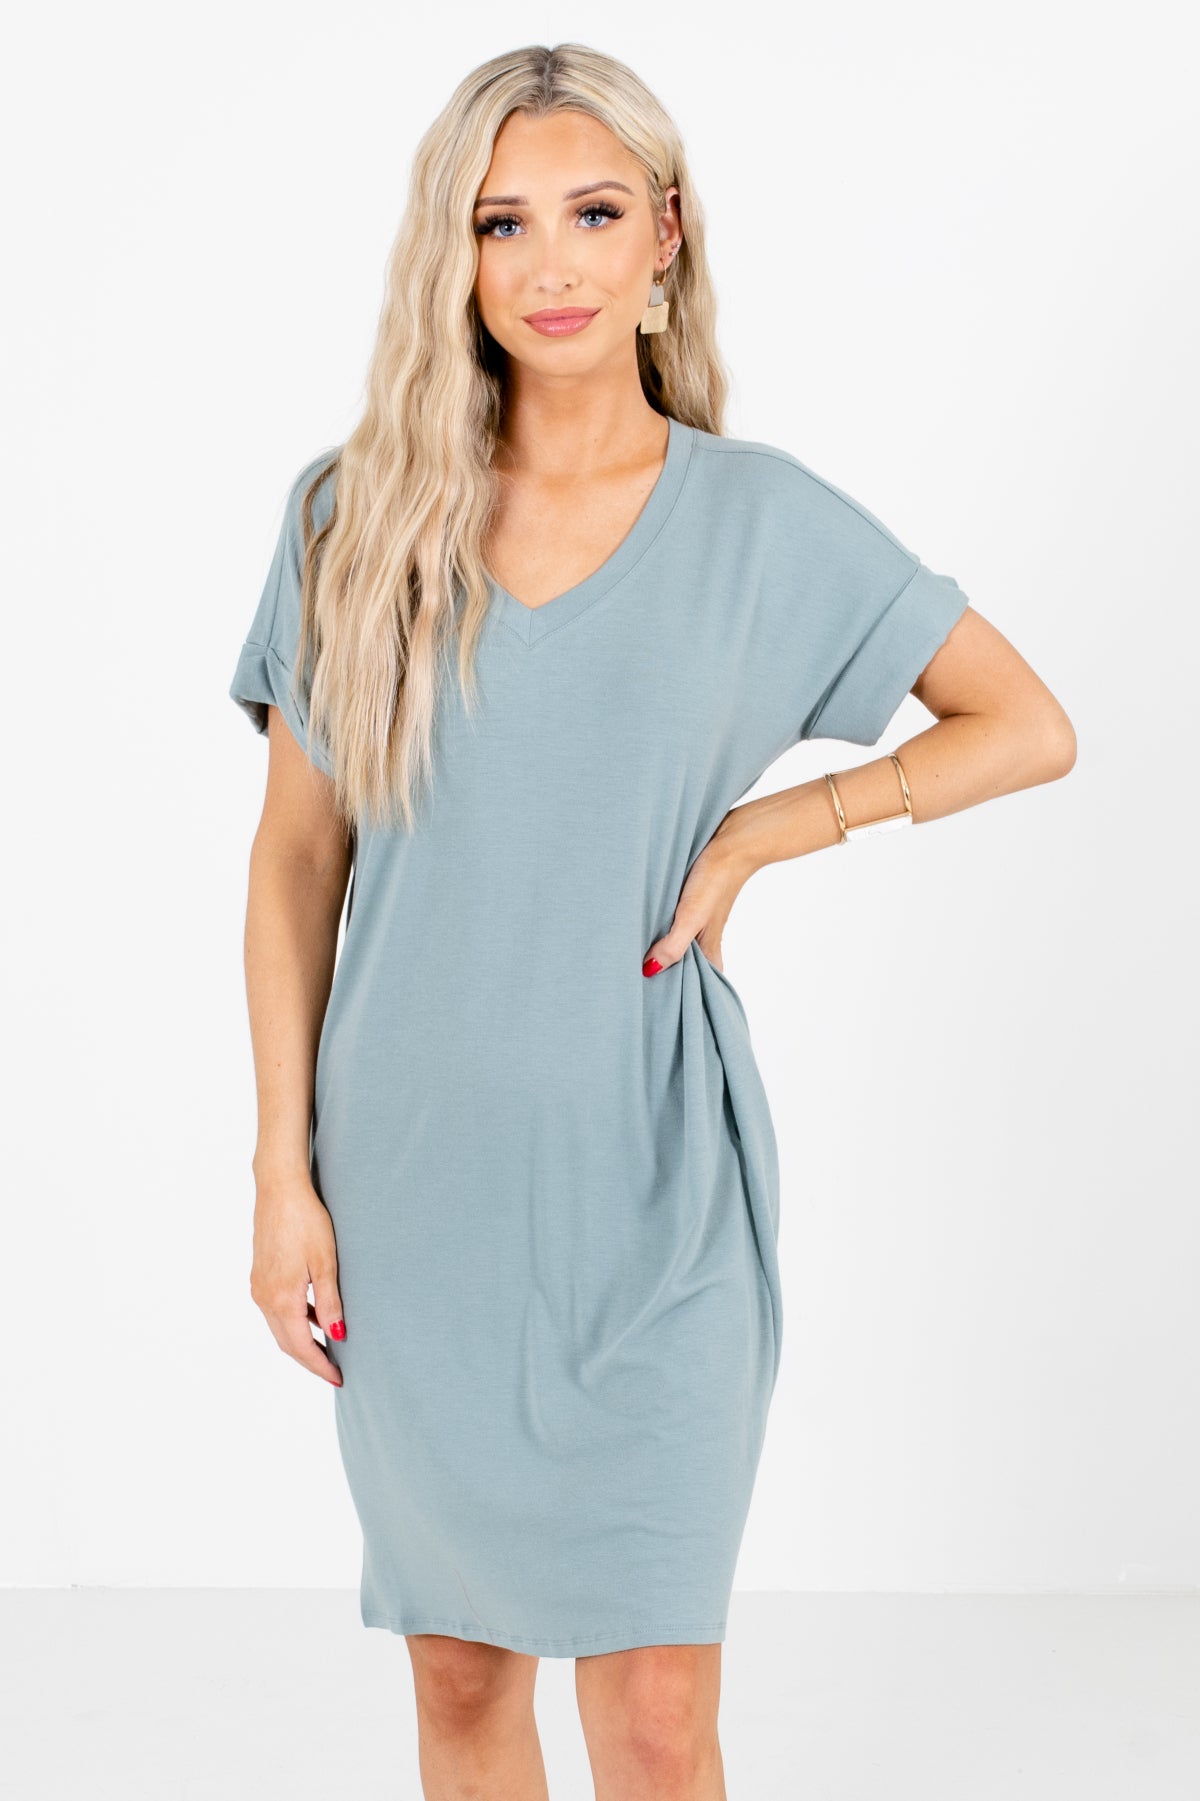 Green High-Quality Lightweight Material Boutique Dresses for Women